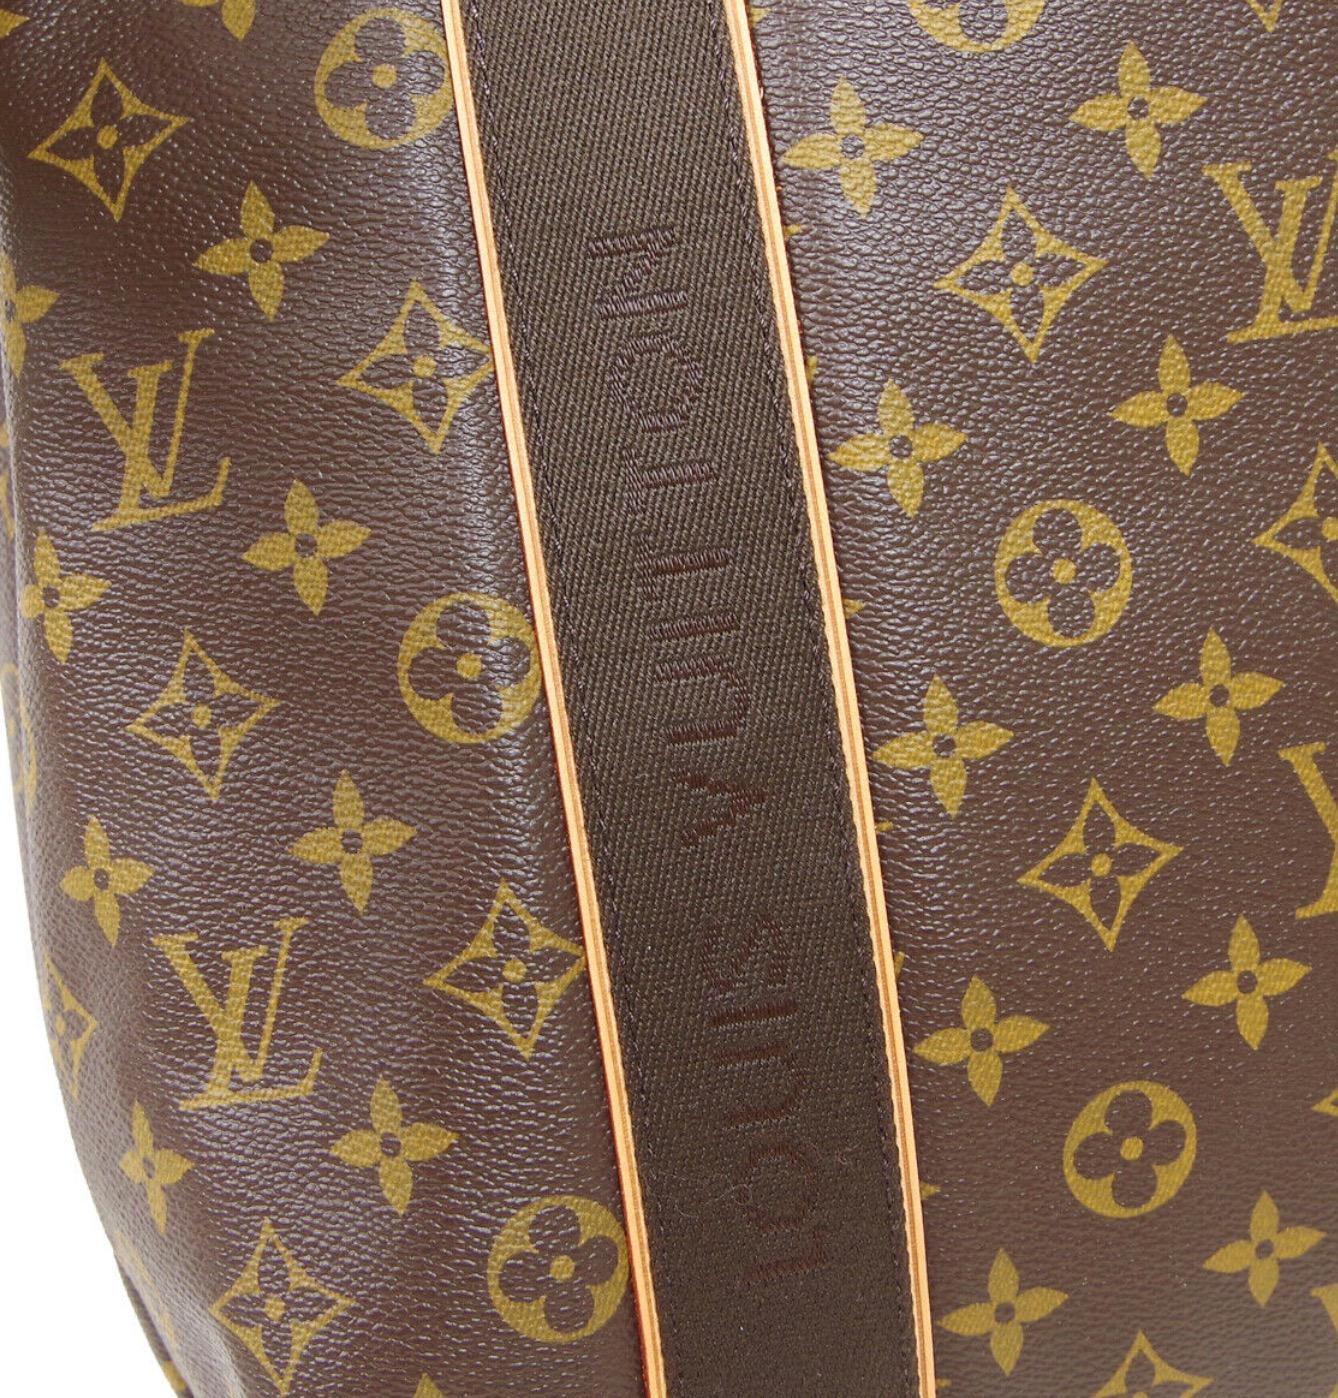 Monogram canvas
Leather
Fabric
Woven interior
Made in France
Shoulder strap drop 9